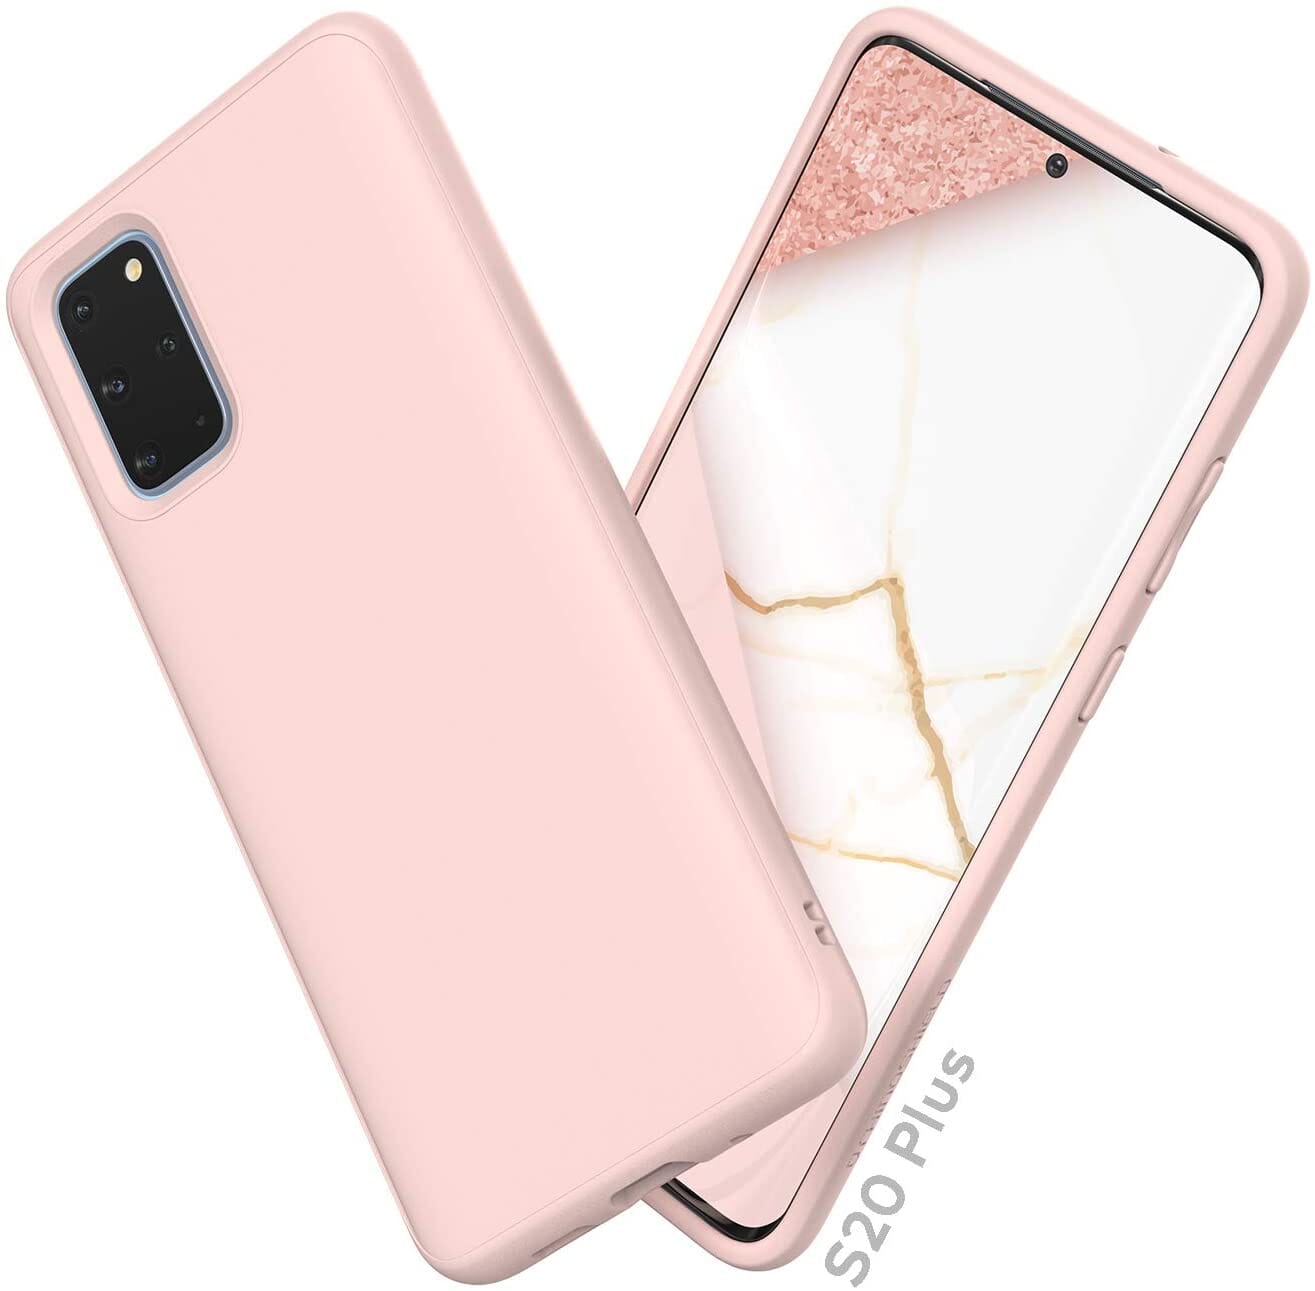 RhinoShield SolidSuit Protective Case with Premium Finish for Samsung Galaxy S20 Series Samsung S20 Series RhinoShield Classic Blush Pink Samsung Galaxy S20 Plus 